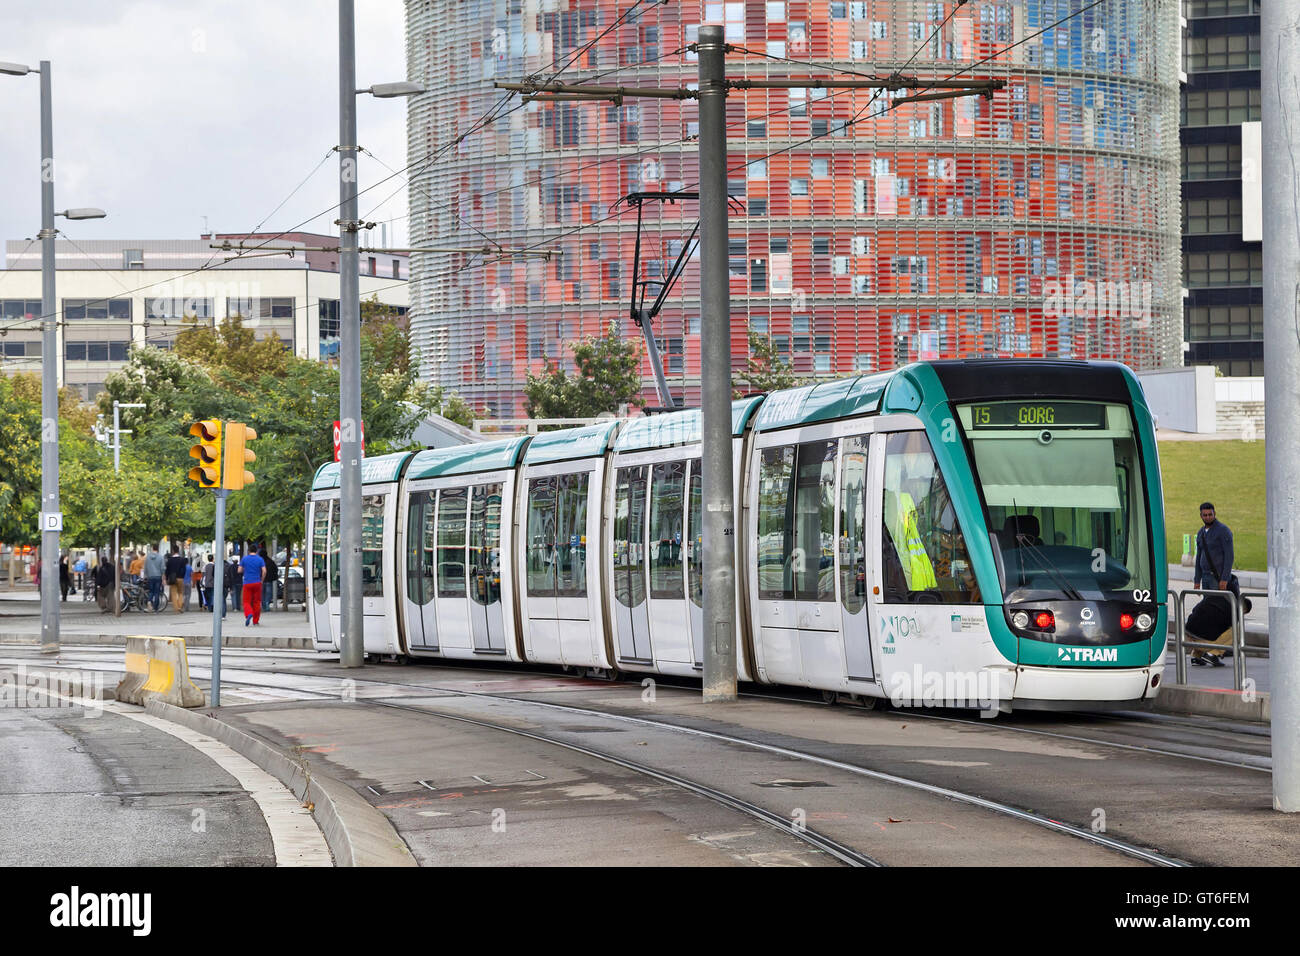 Barcelona tram known as Trambaix with Agbar tower on background Stock Photo